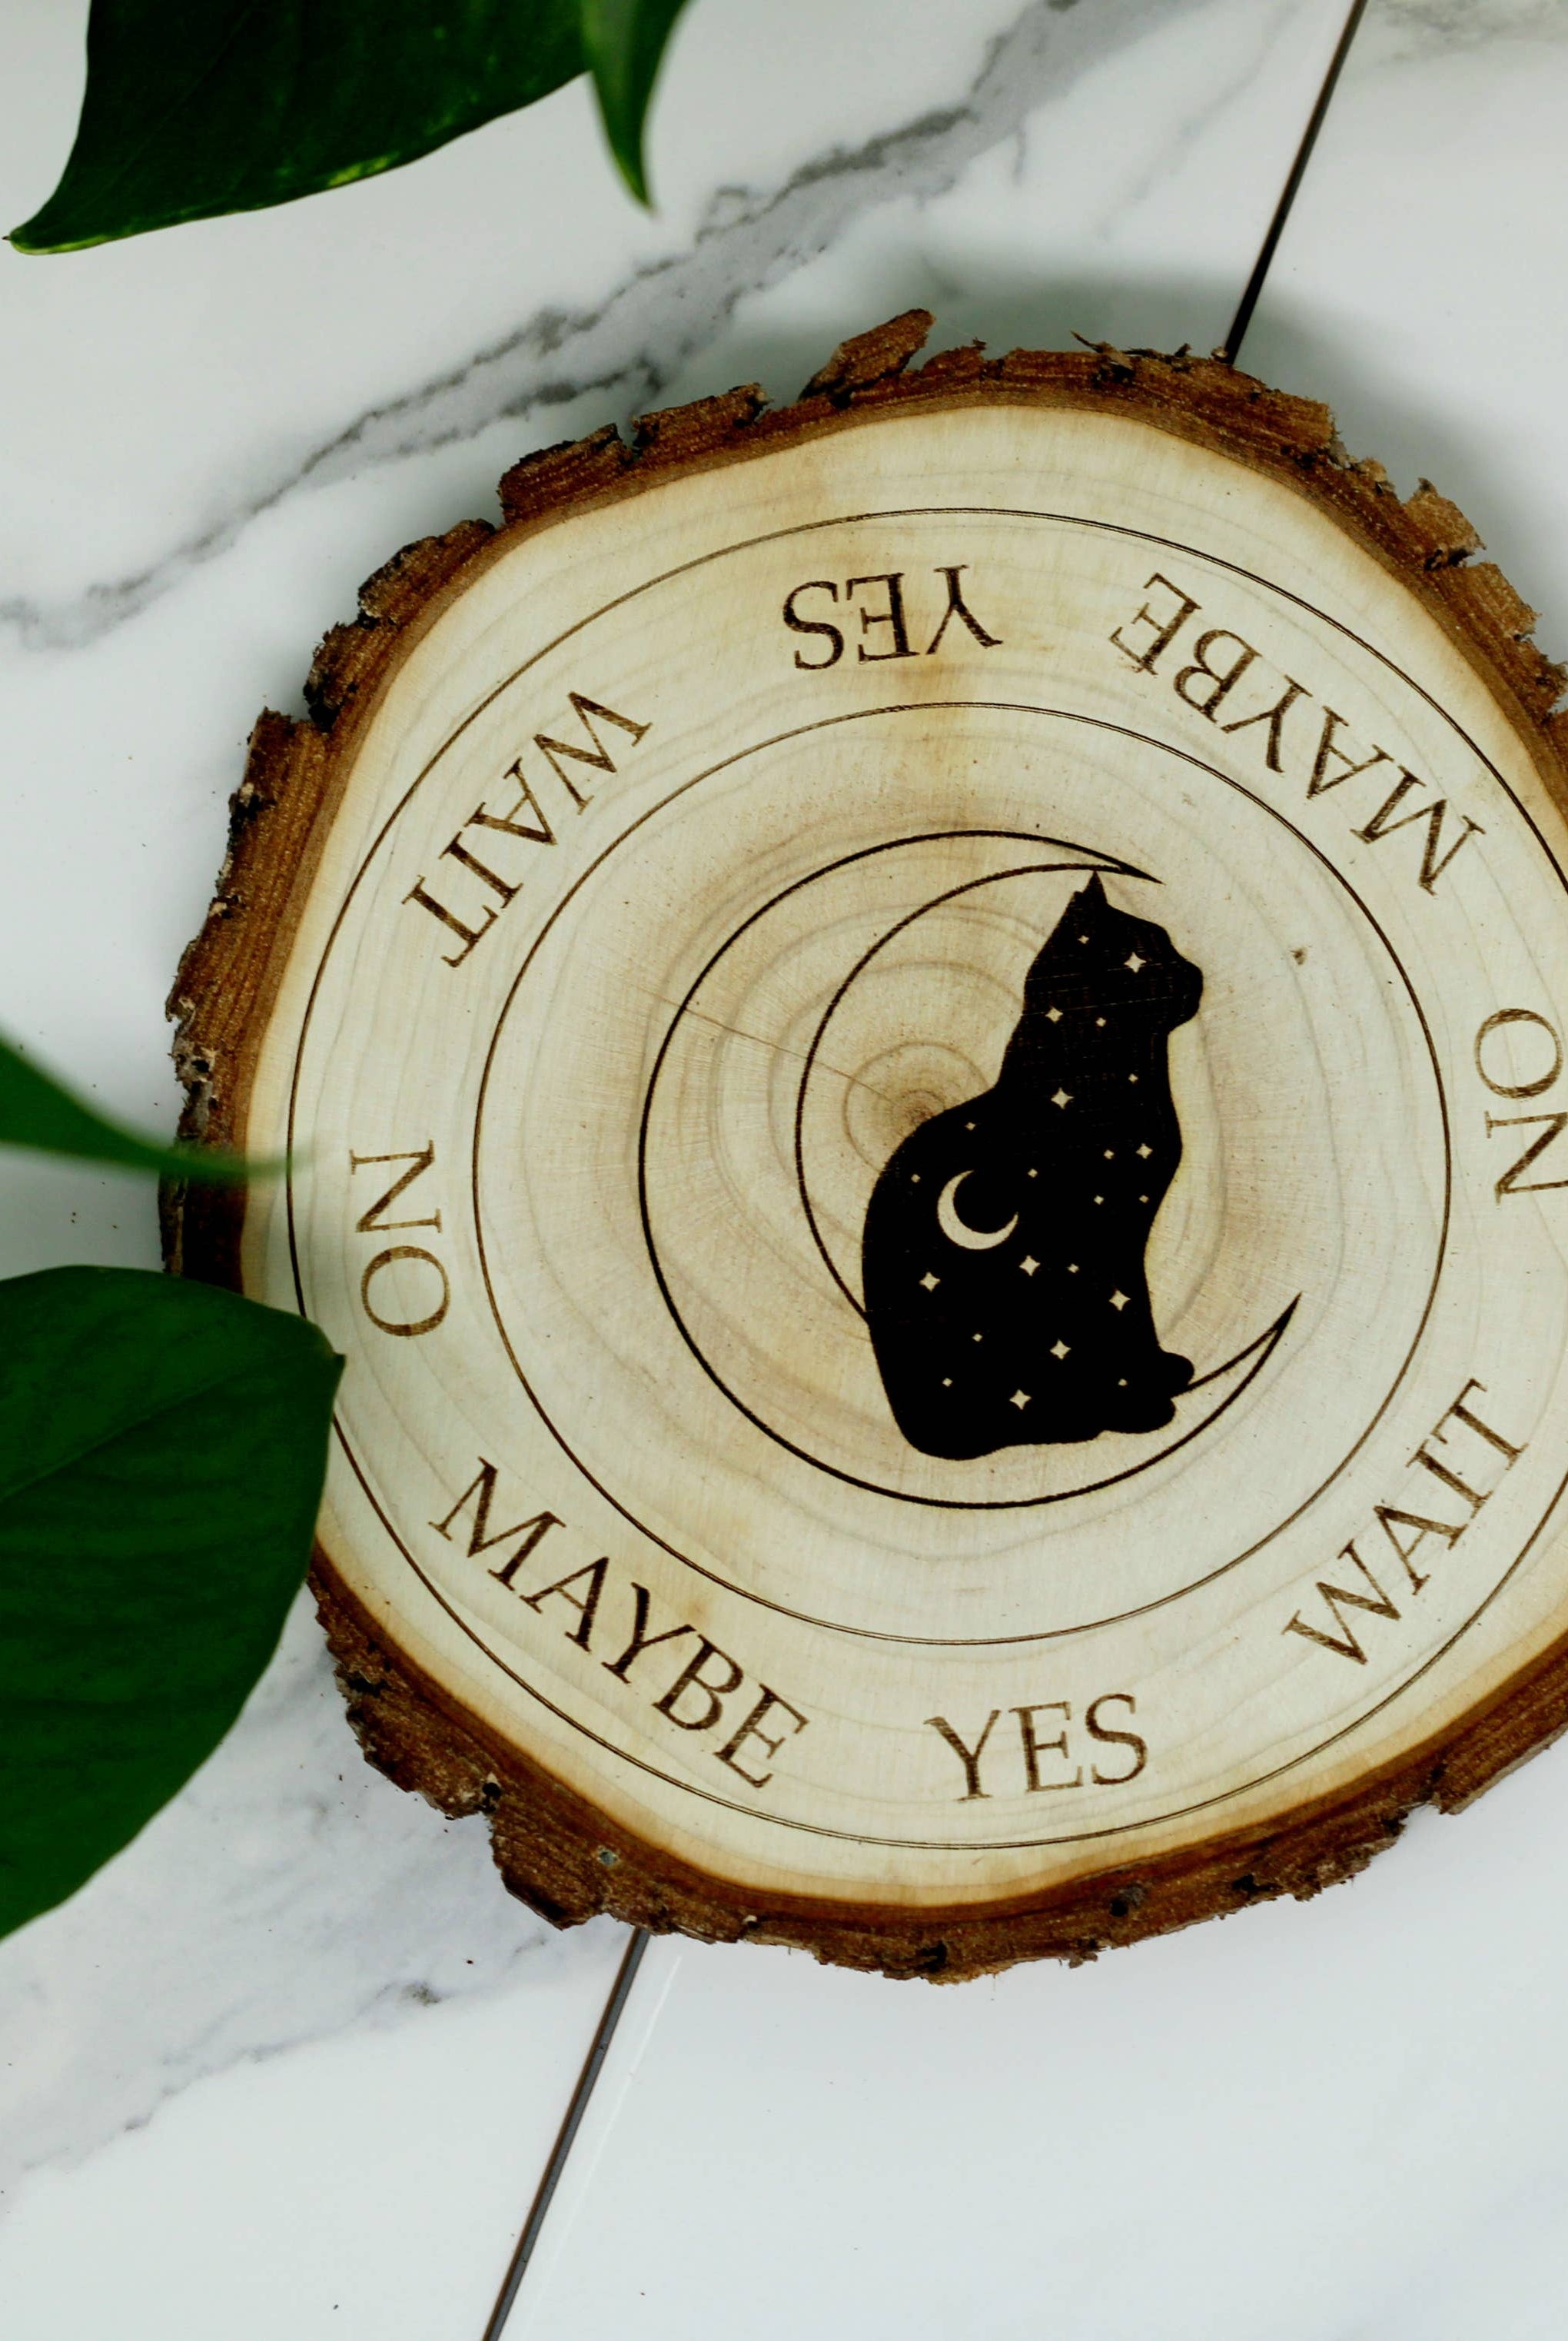 A Faire Three Witches Tea Shop Handmade Natural Wood Cat + Crescent Moon Pendulum Board & Pendulum with "maybe, yes, wait" etched around a spiraled design, infused with essential oil, placed on a marble surface beside a green leaf.